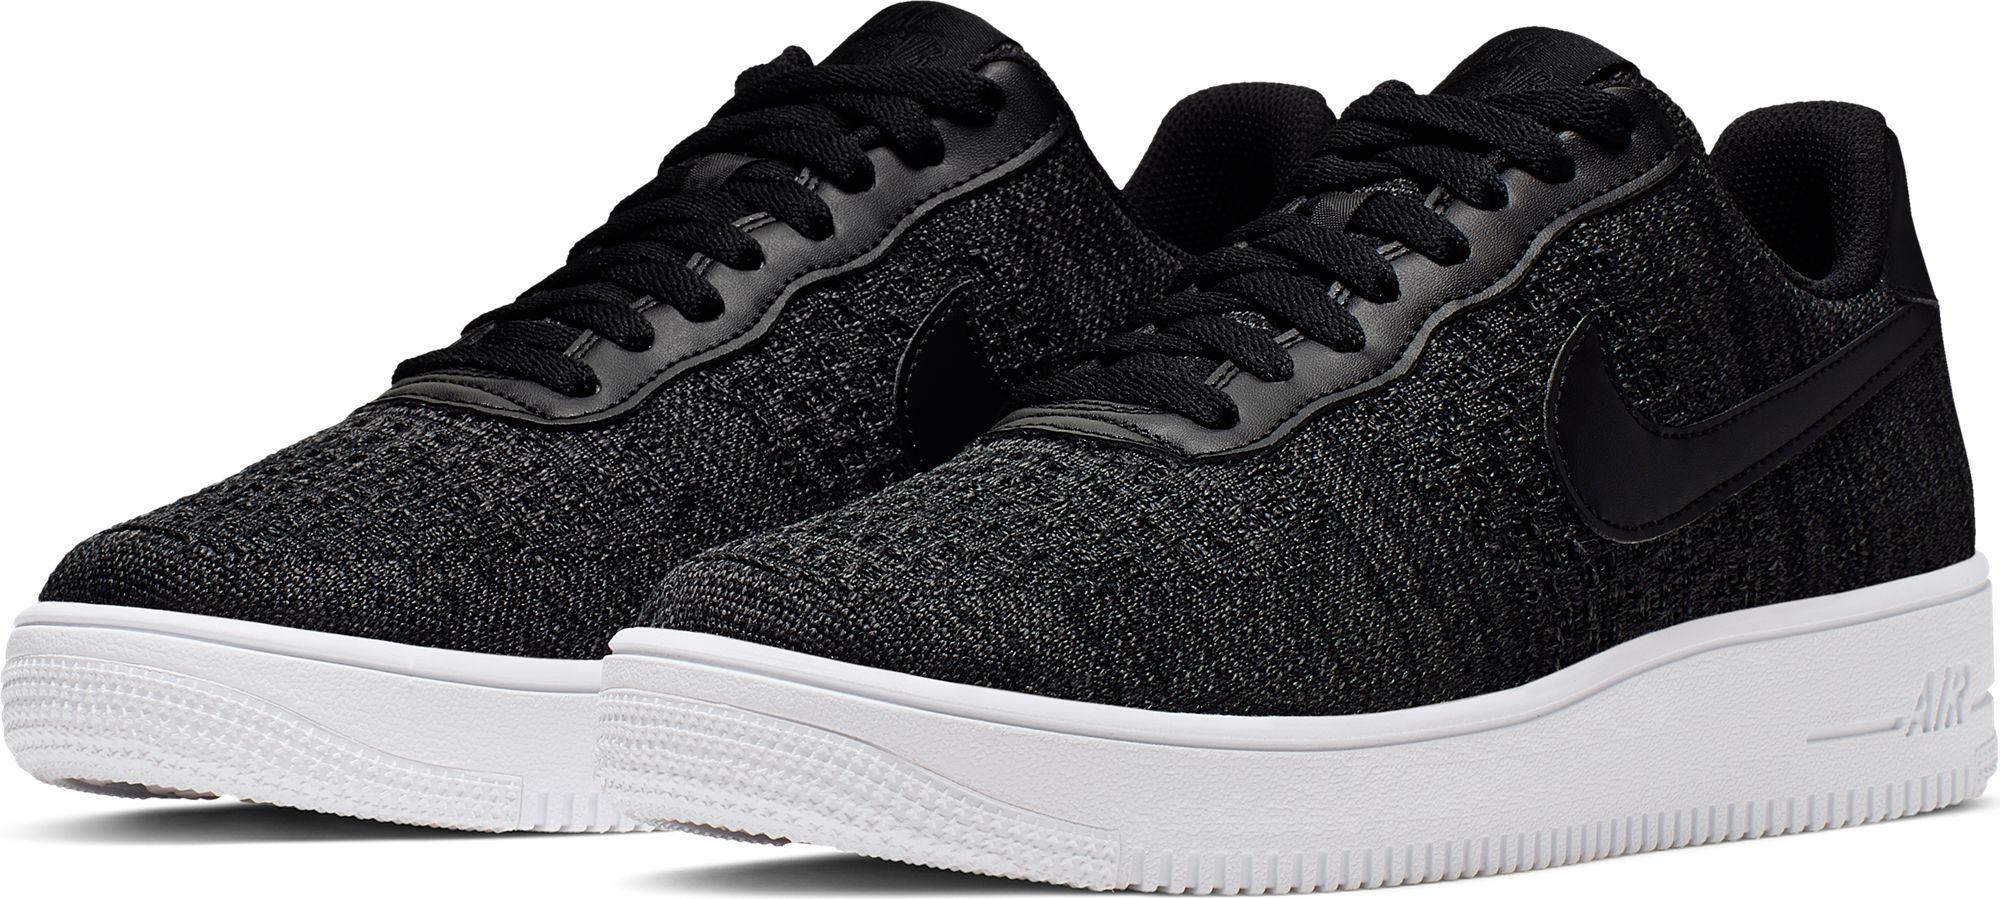 air force flyknit 2.0 black